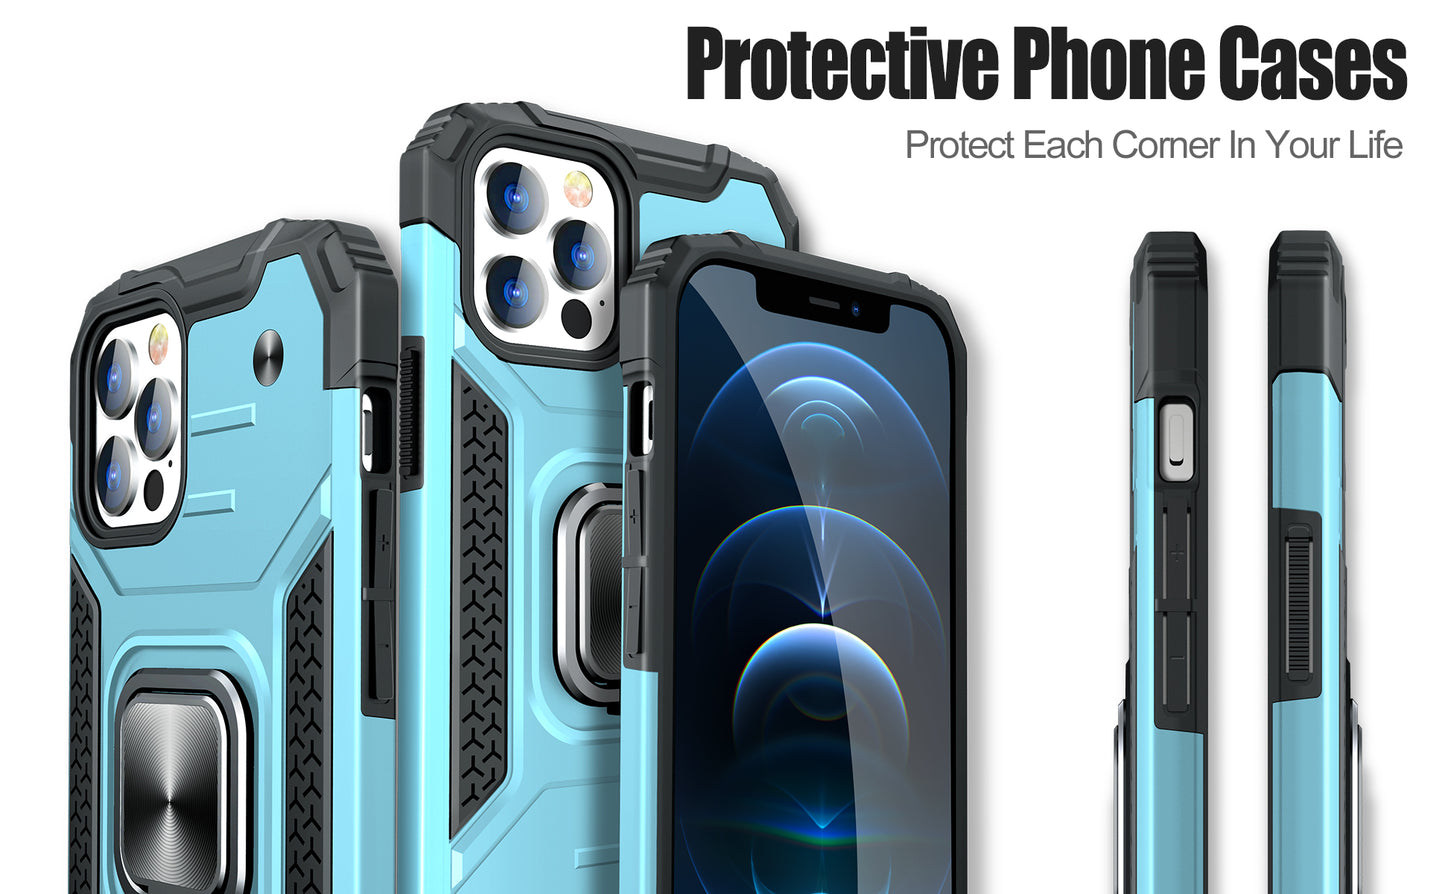 JAME Case for iPhone 12 Pro Max Case with Screen Protectors 2Pcs, Military-Grade Drop Protection Cover, Protective Phone Cases, with Ring Kickstand, Bumper Case for iPhone 12 Pro Max 6.7”